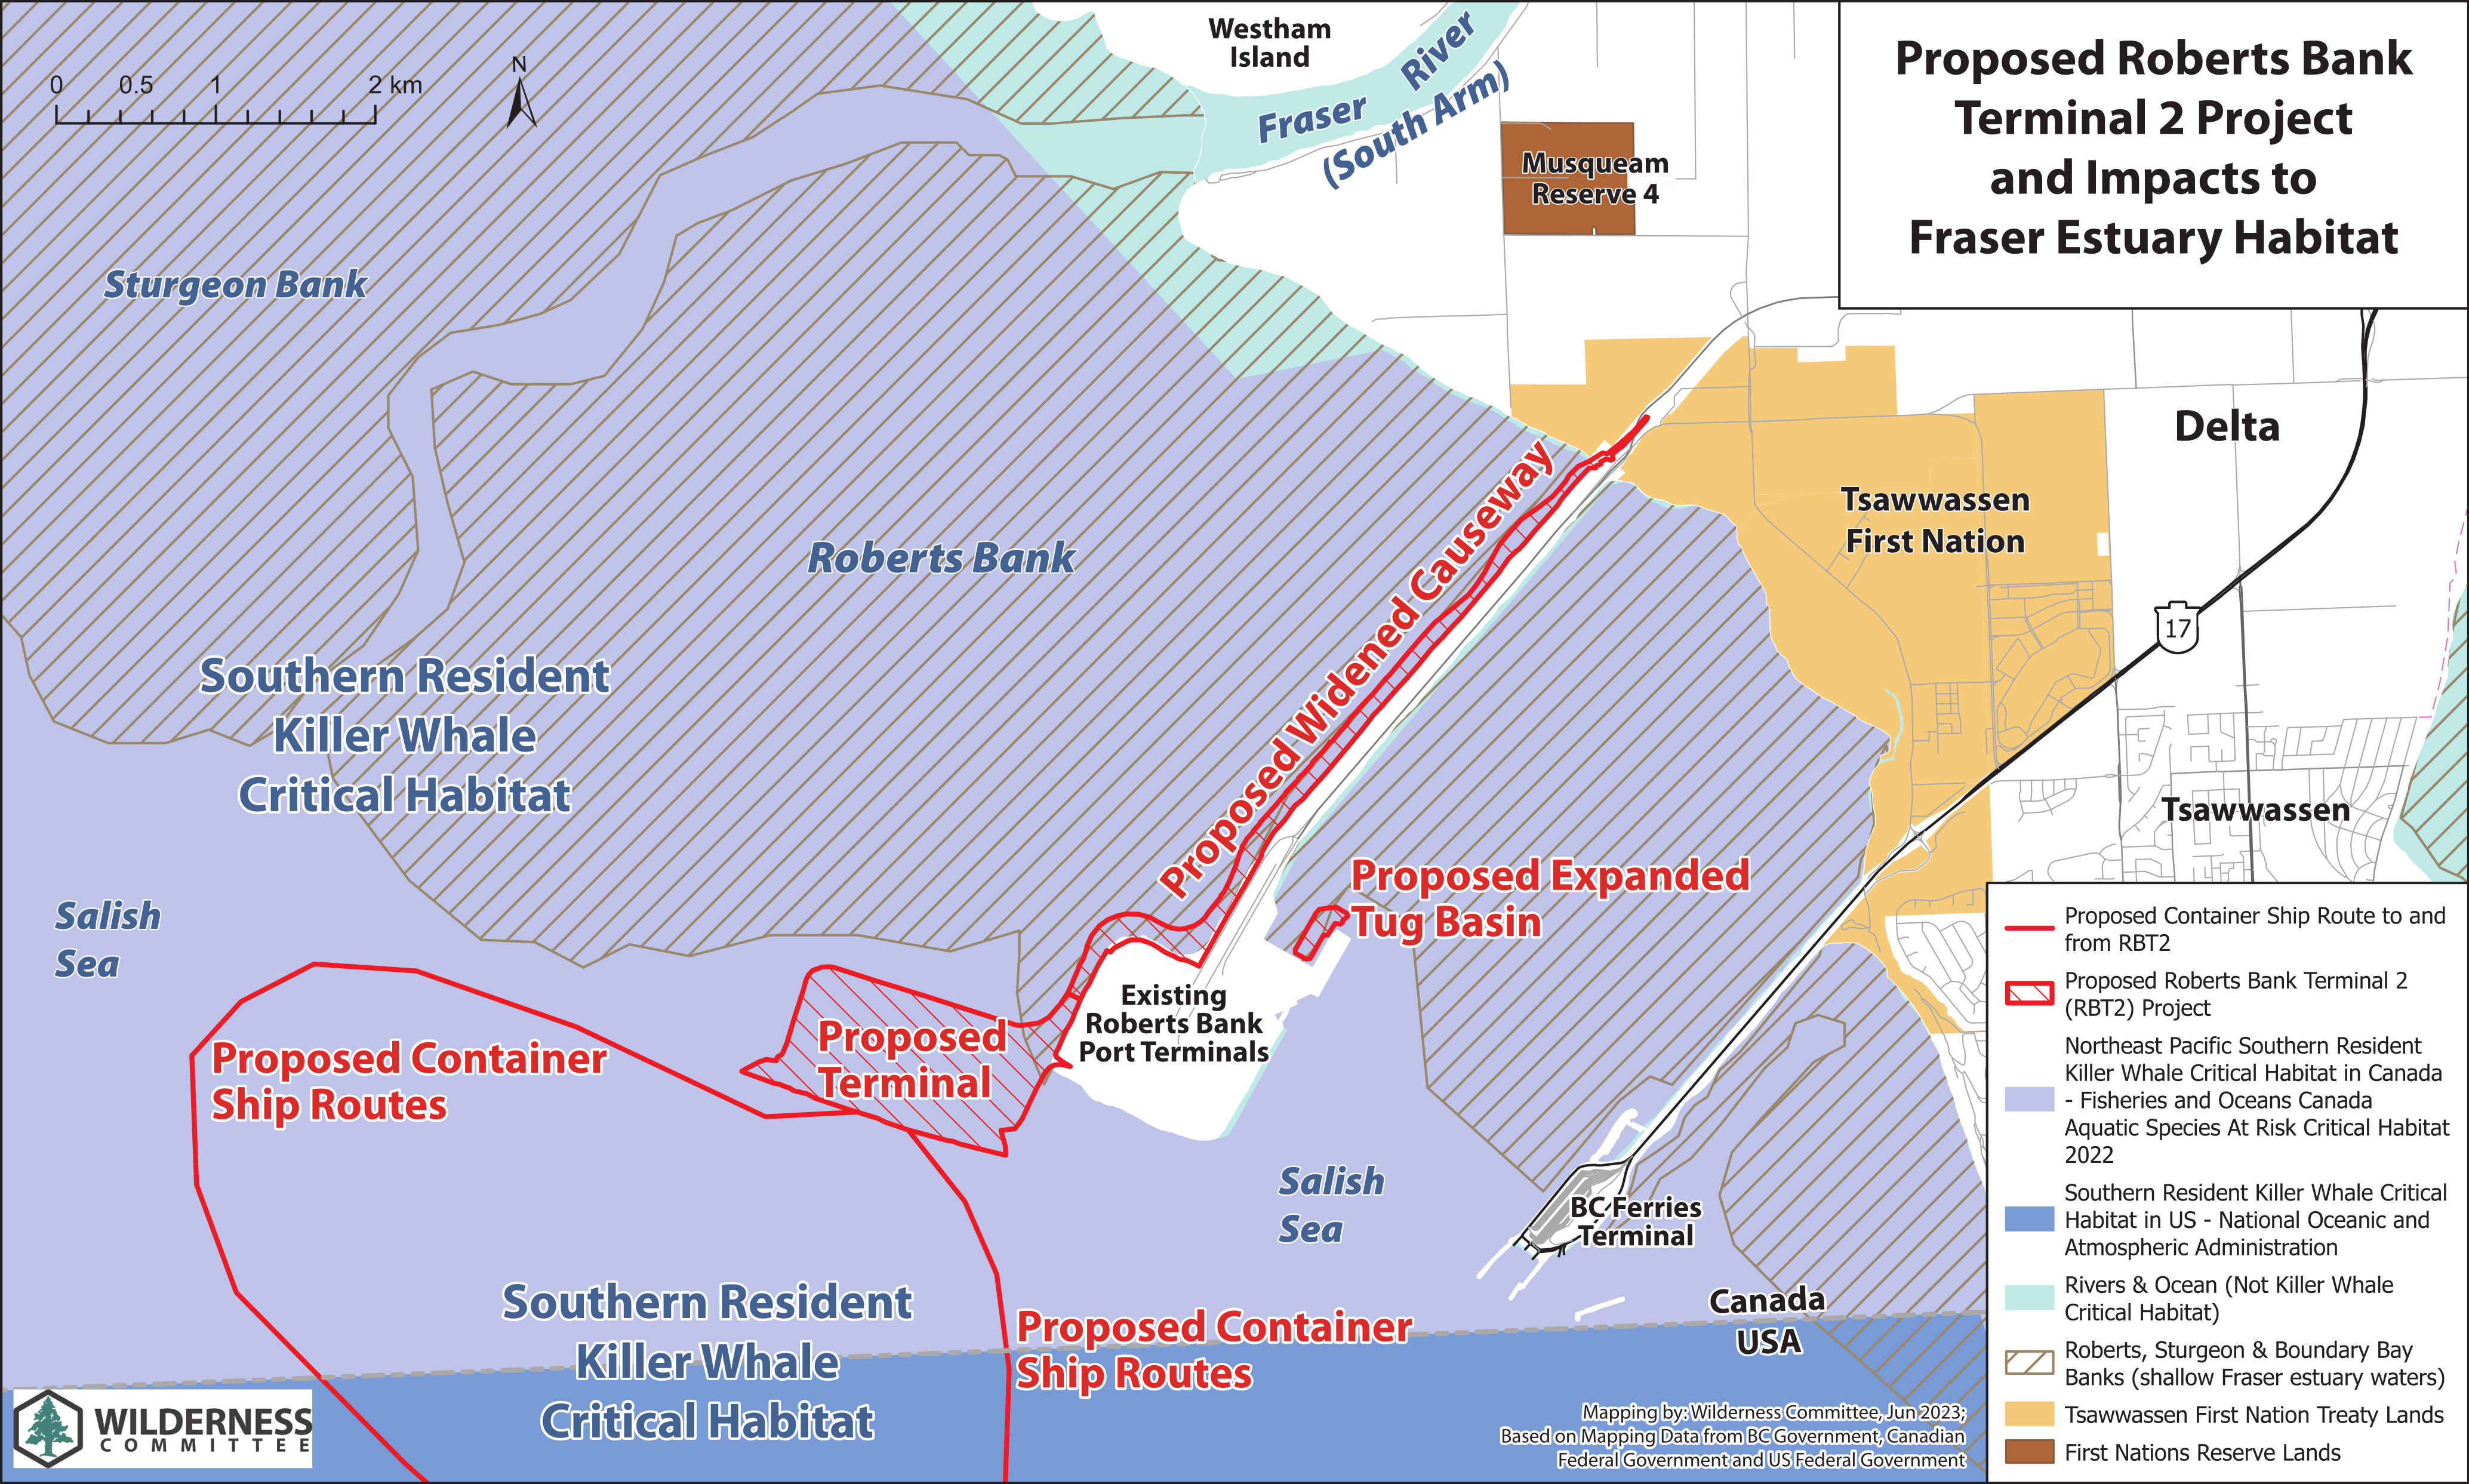 Proposed Roberts Bank Terminal 2 and Impacts to Southern Resident Killer Whale Critical Habitat Map